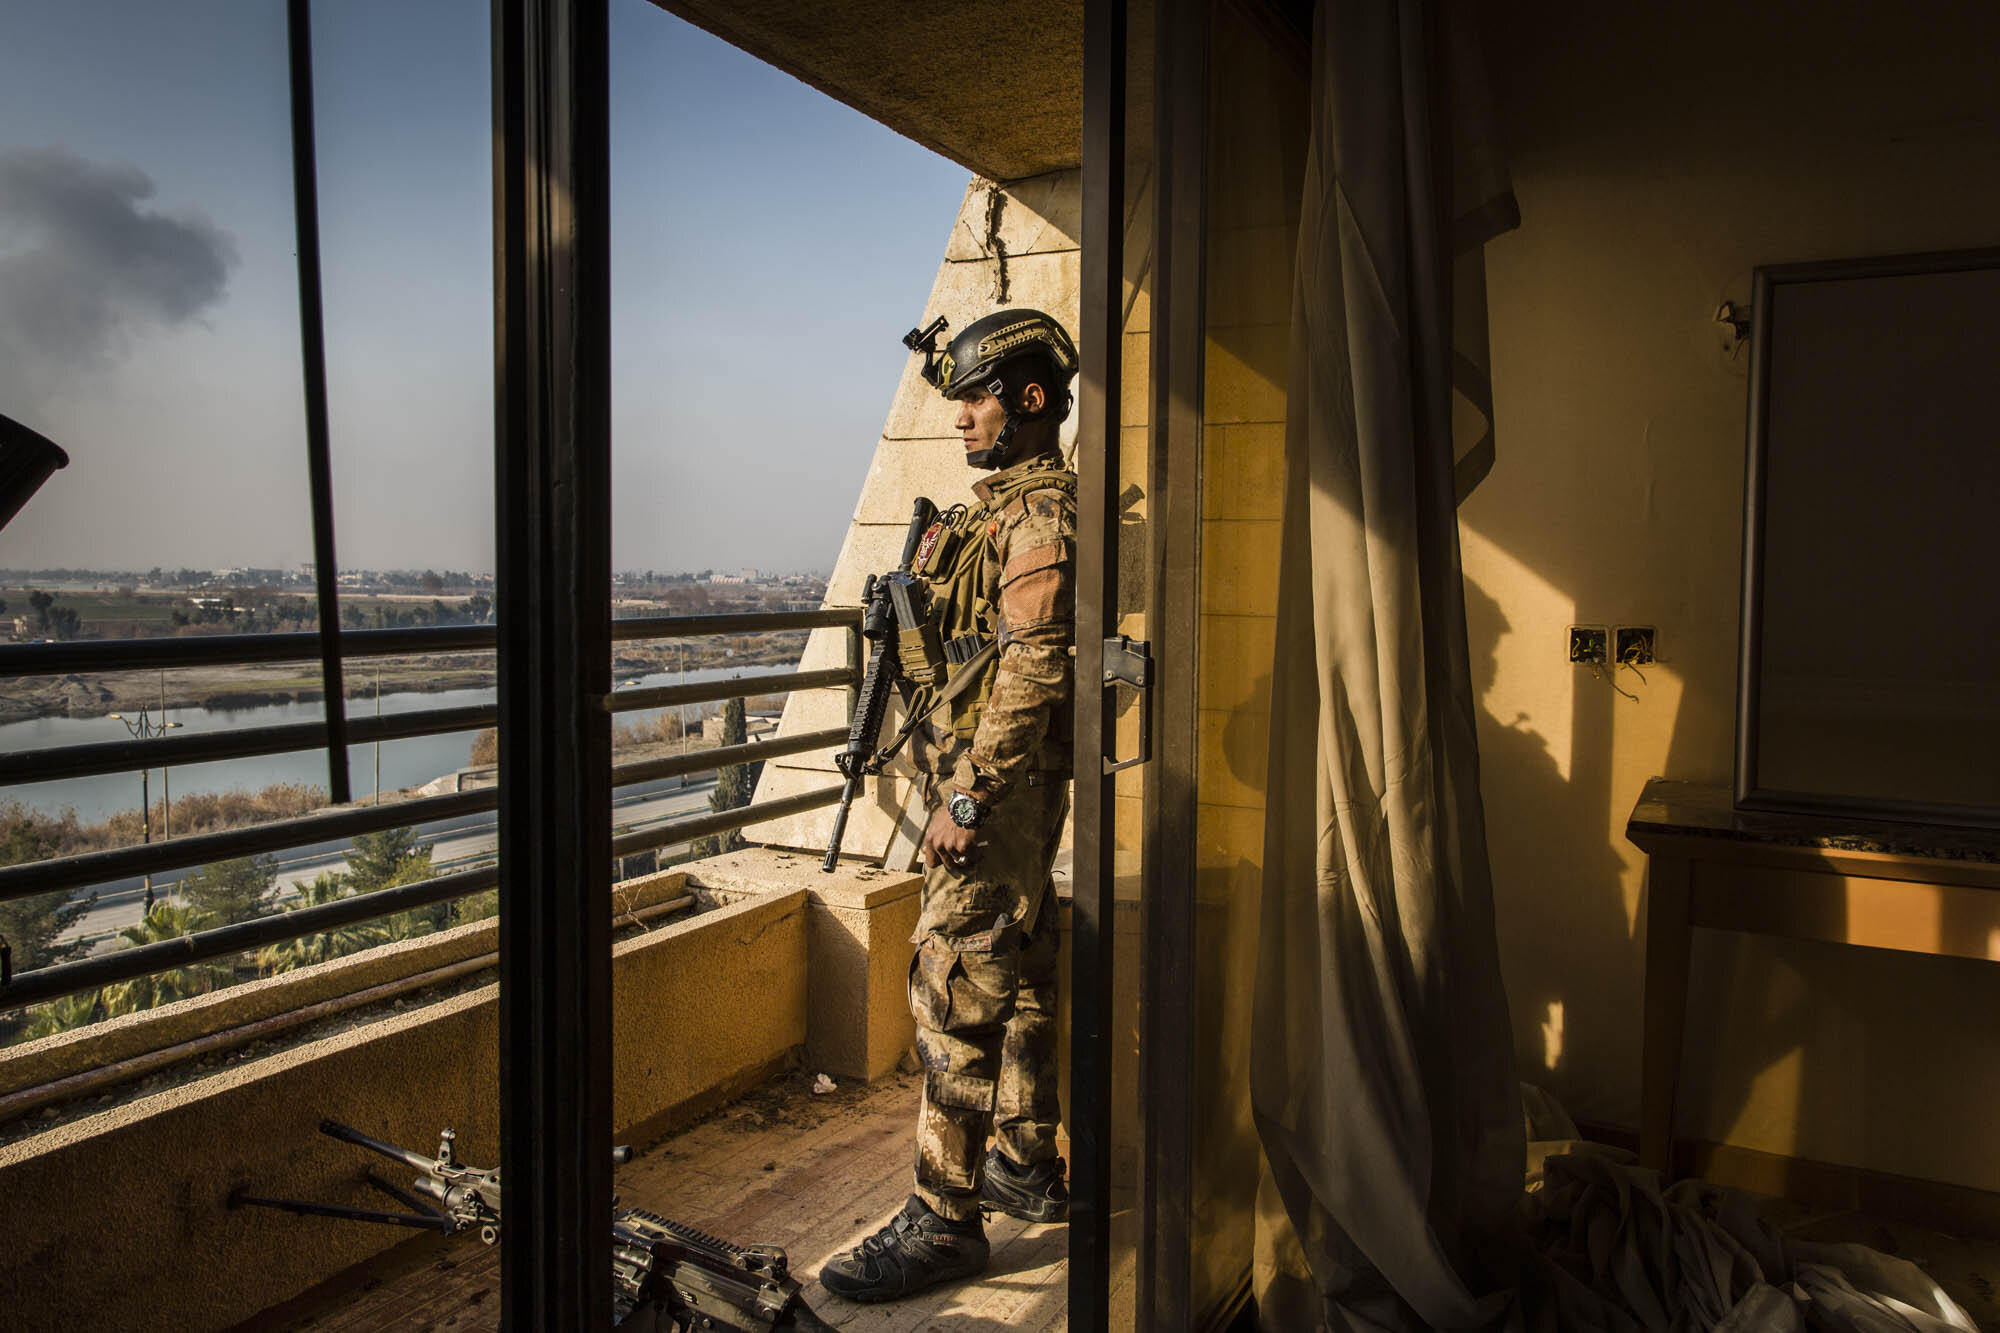  An Iraqi special forces soldier looked out over the river Tigris, towards ISIS controlled west Mosul from the balcony of a room at the Nineveh International Hotel. Iraq - January 2017 